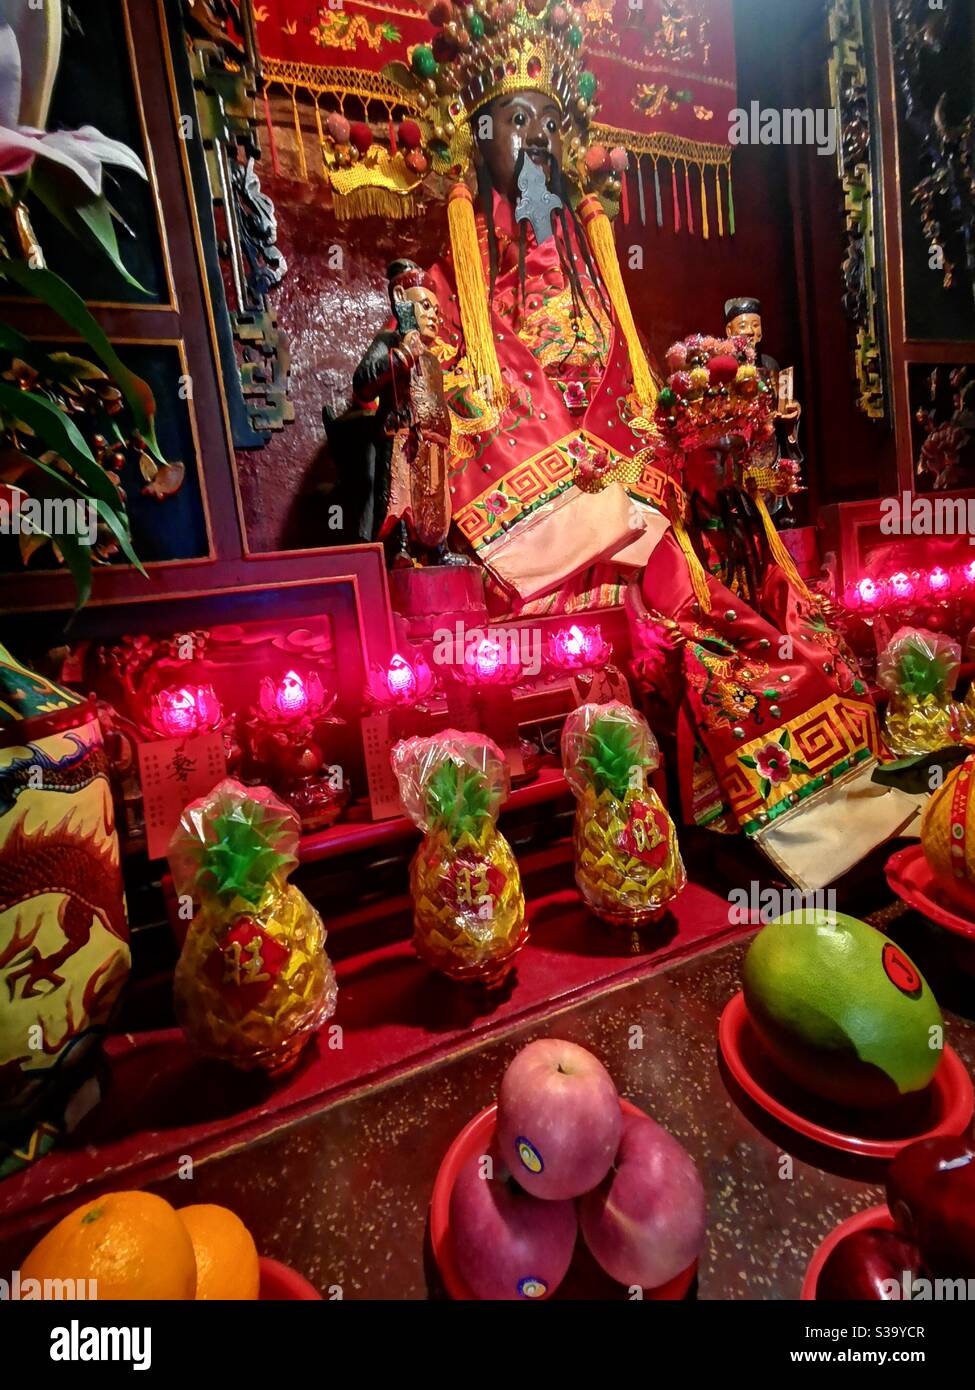 Offers given to the deity at the beautiful Hung Shing temple in Ap Lei Chau, Hong Kong. Stock Photo